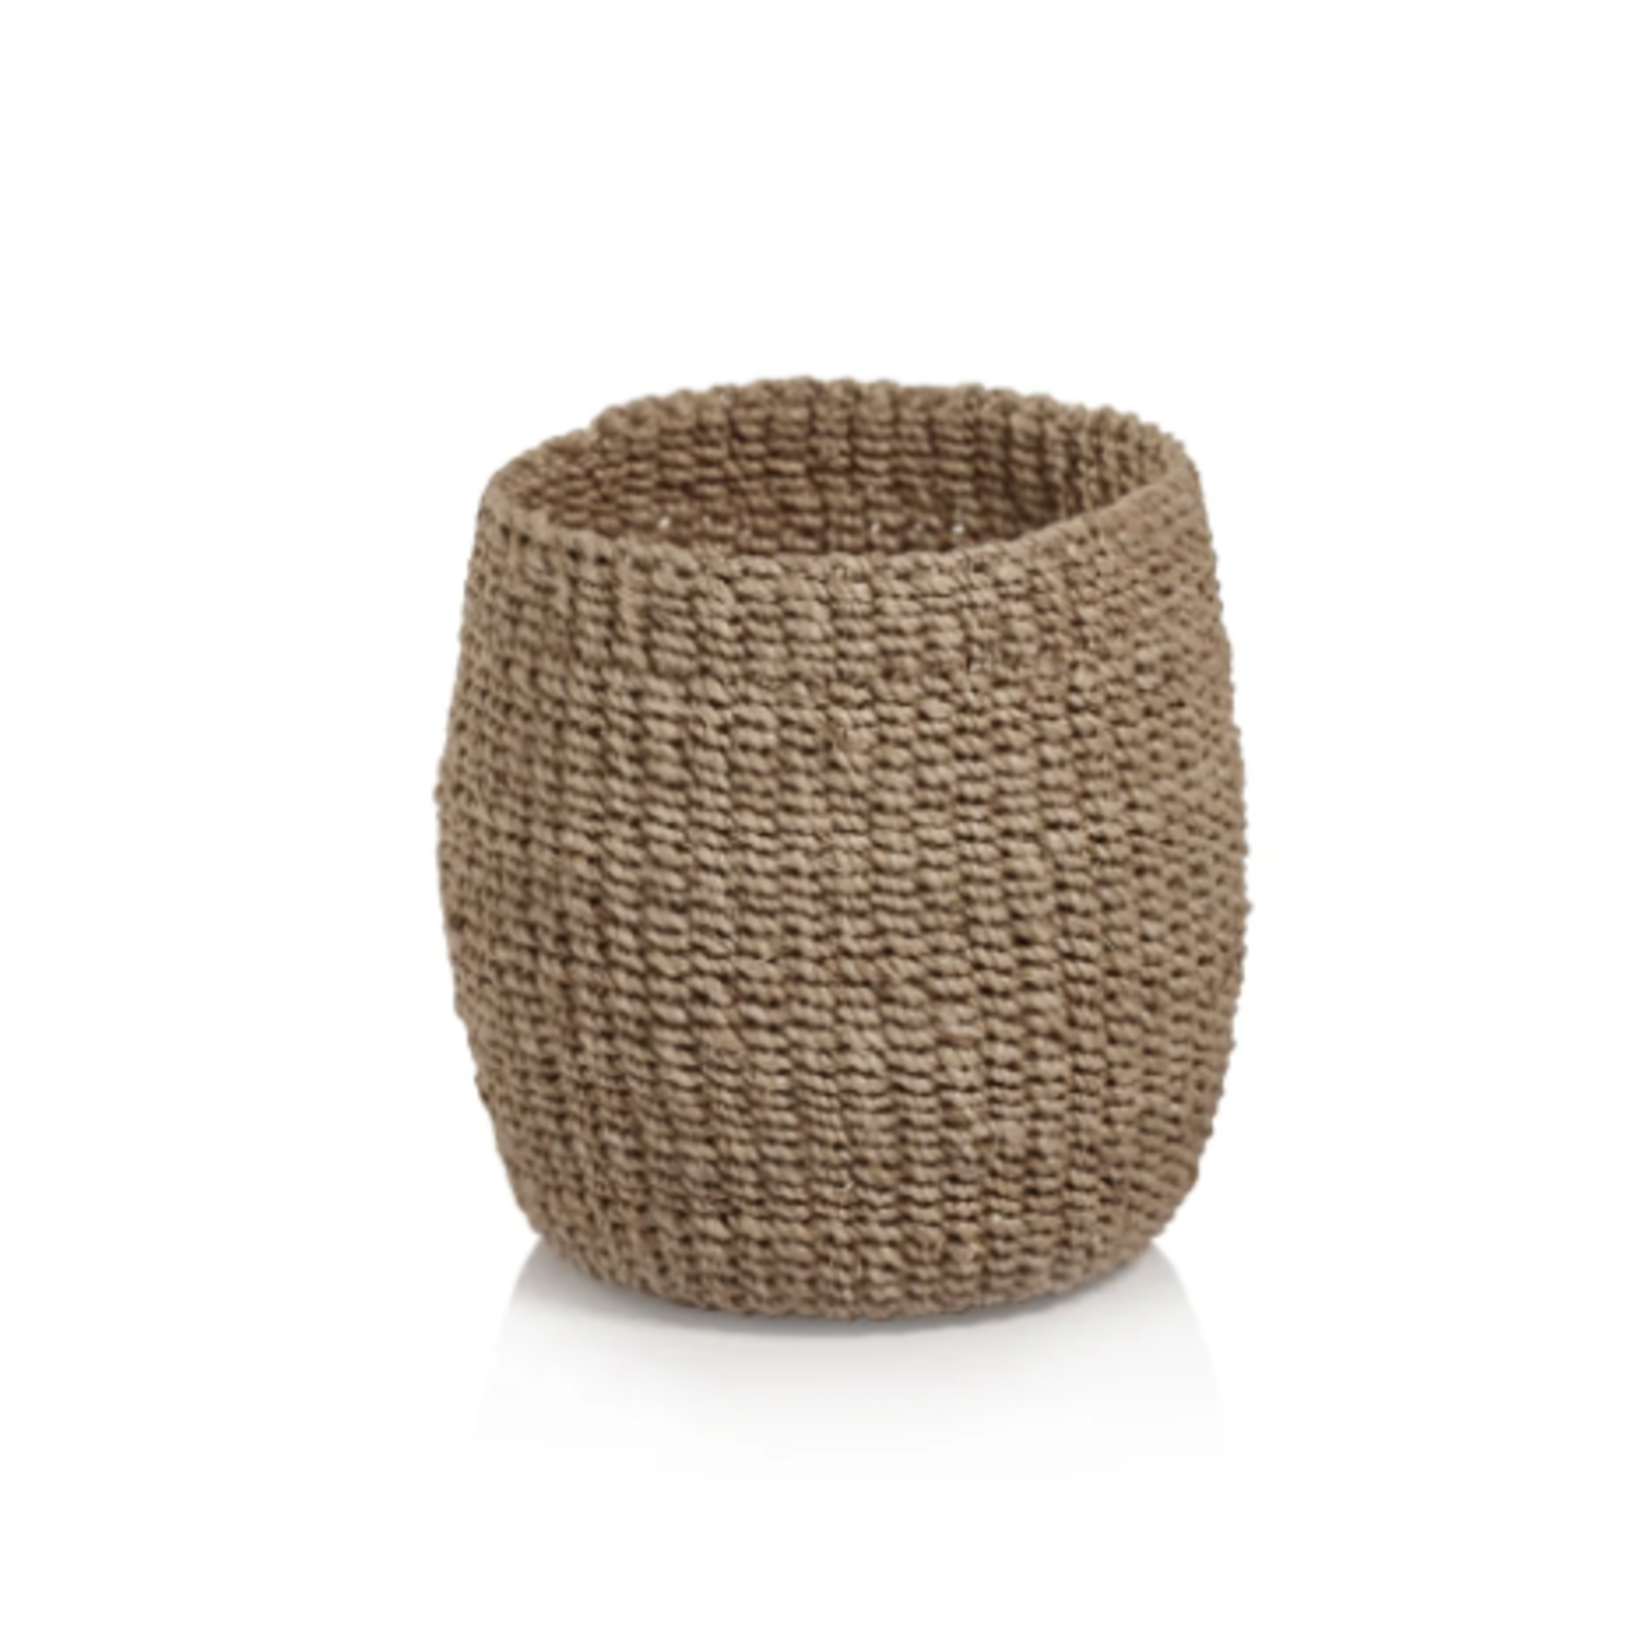 Outside The Box 6" Hand Loomed Natural Abaca Planter / Basket